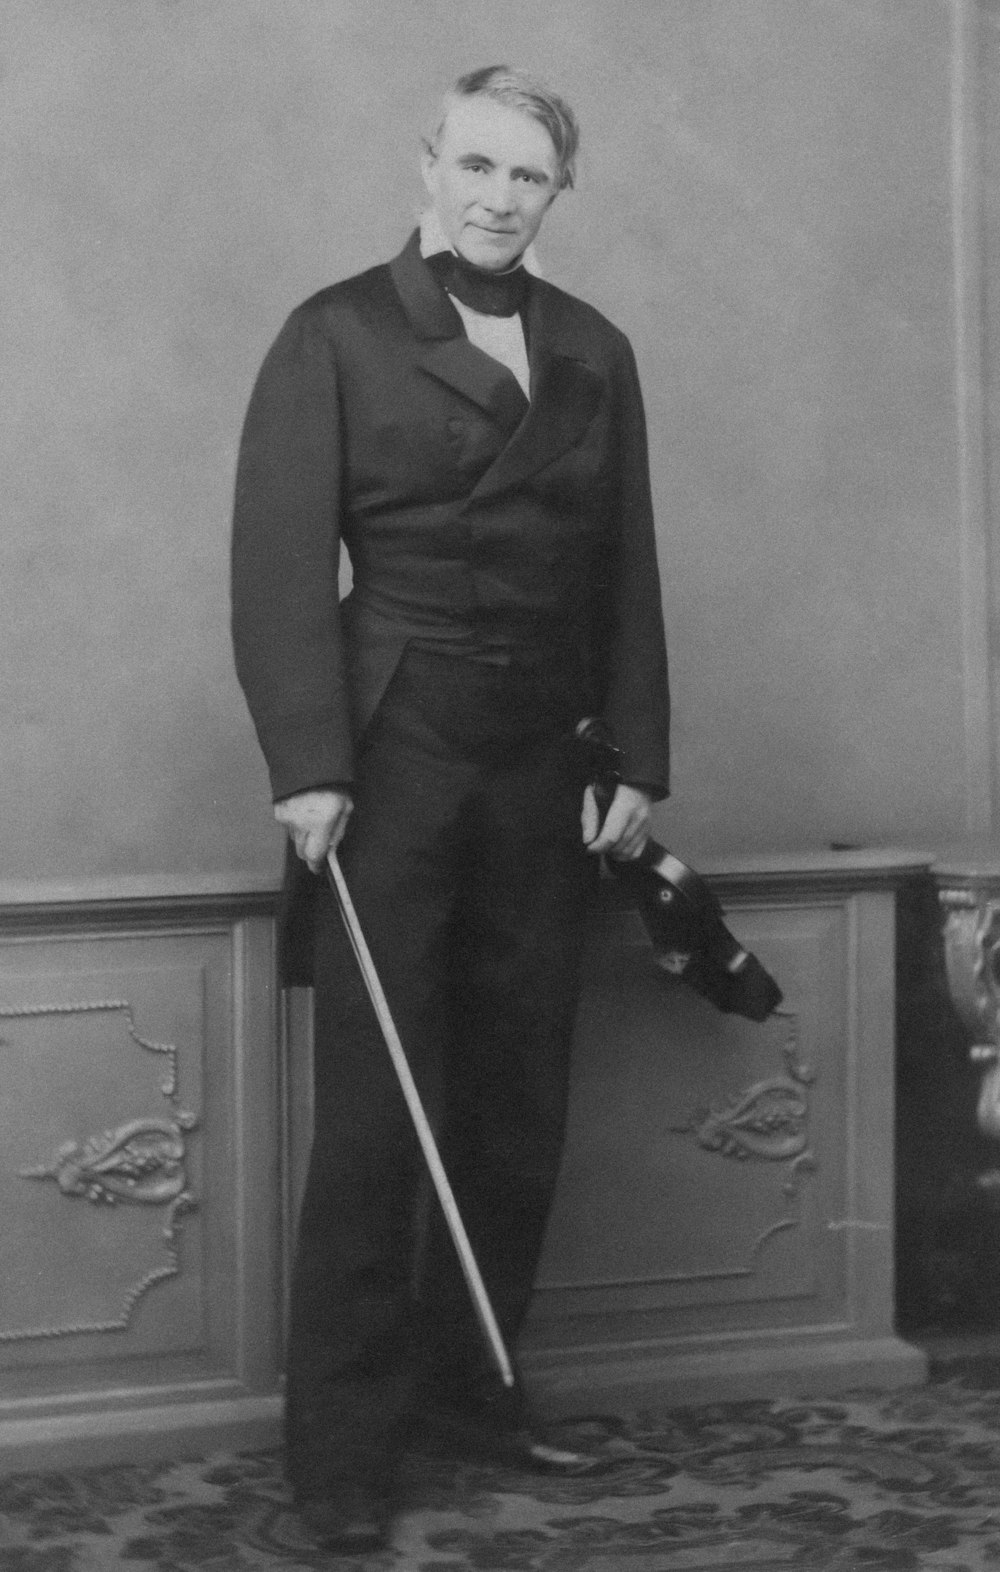 a black and white photo of a man in a tuxedo